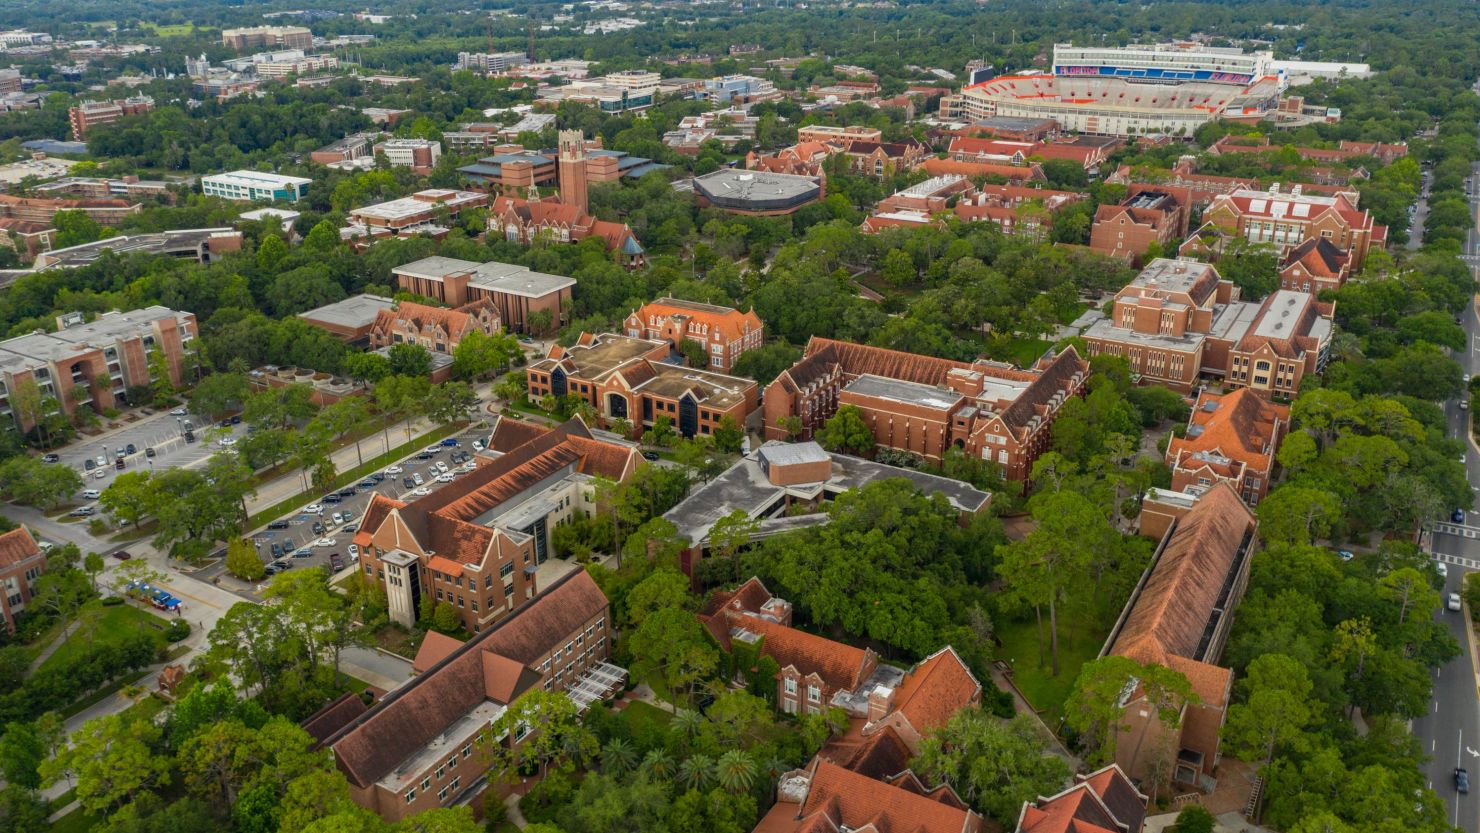 University of Florida reverses decision, will allow professors to